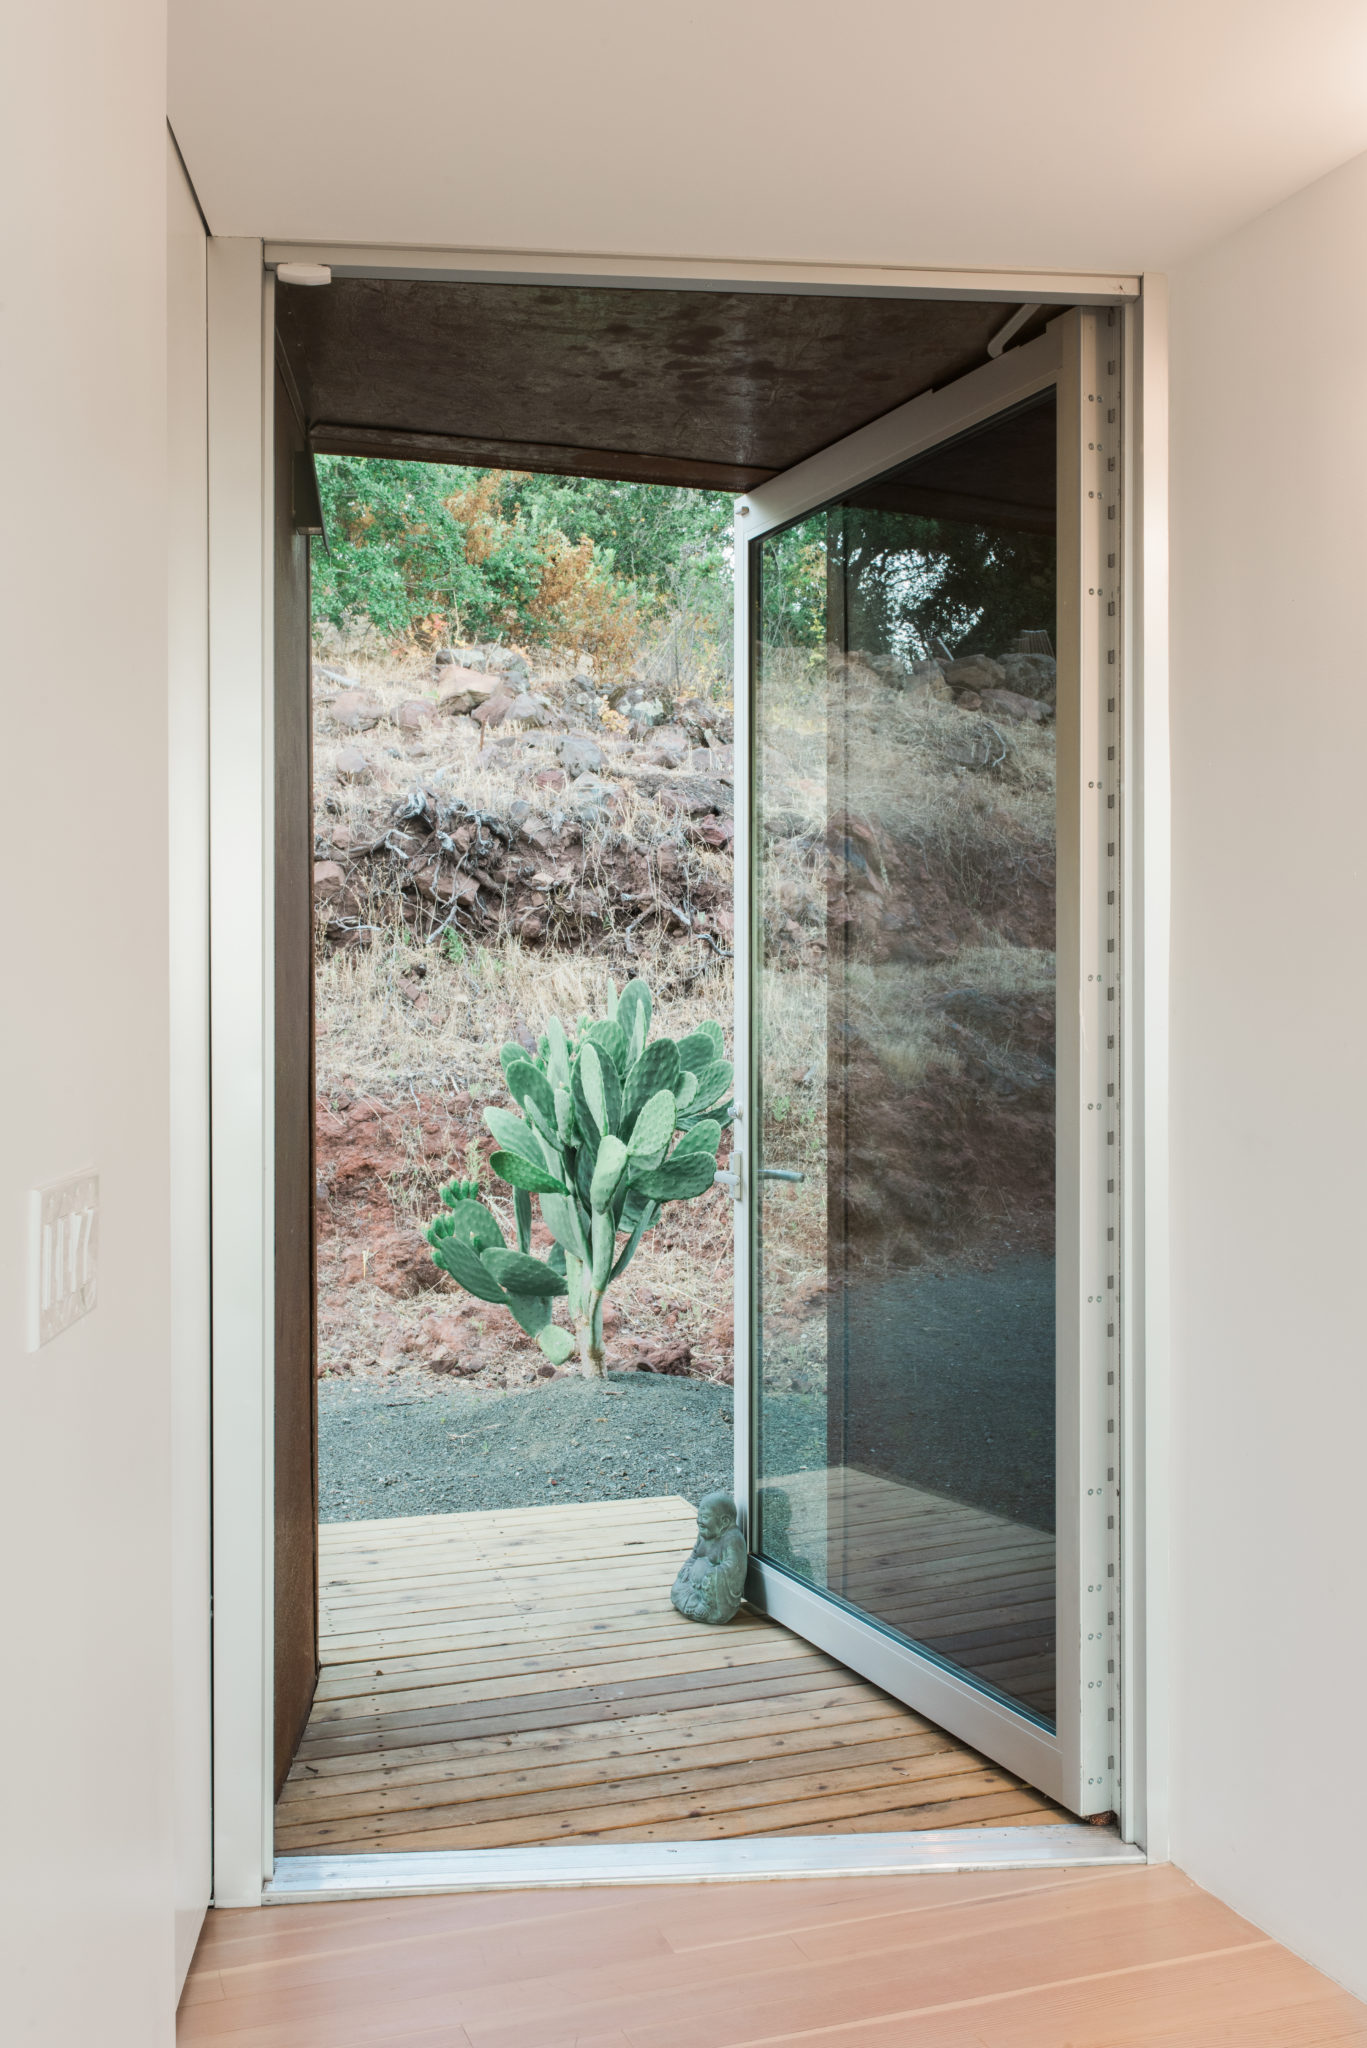 The modern home boasts many beautiful shapes such as this doorway that tapers to the outside. The cactus were planted not only for their visual appeal against the red rock, but also as a deterrent from guests wondering back to the master suite (Hollie says jokingly).